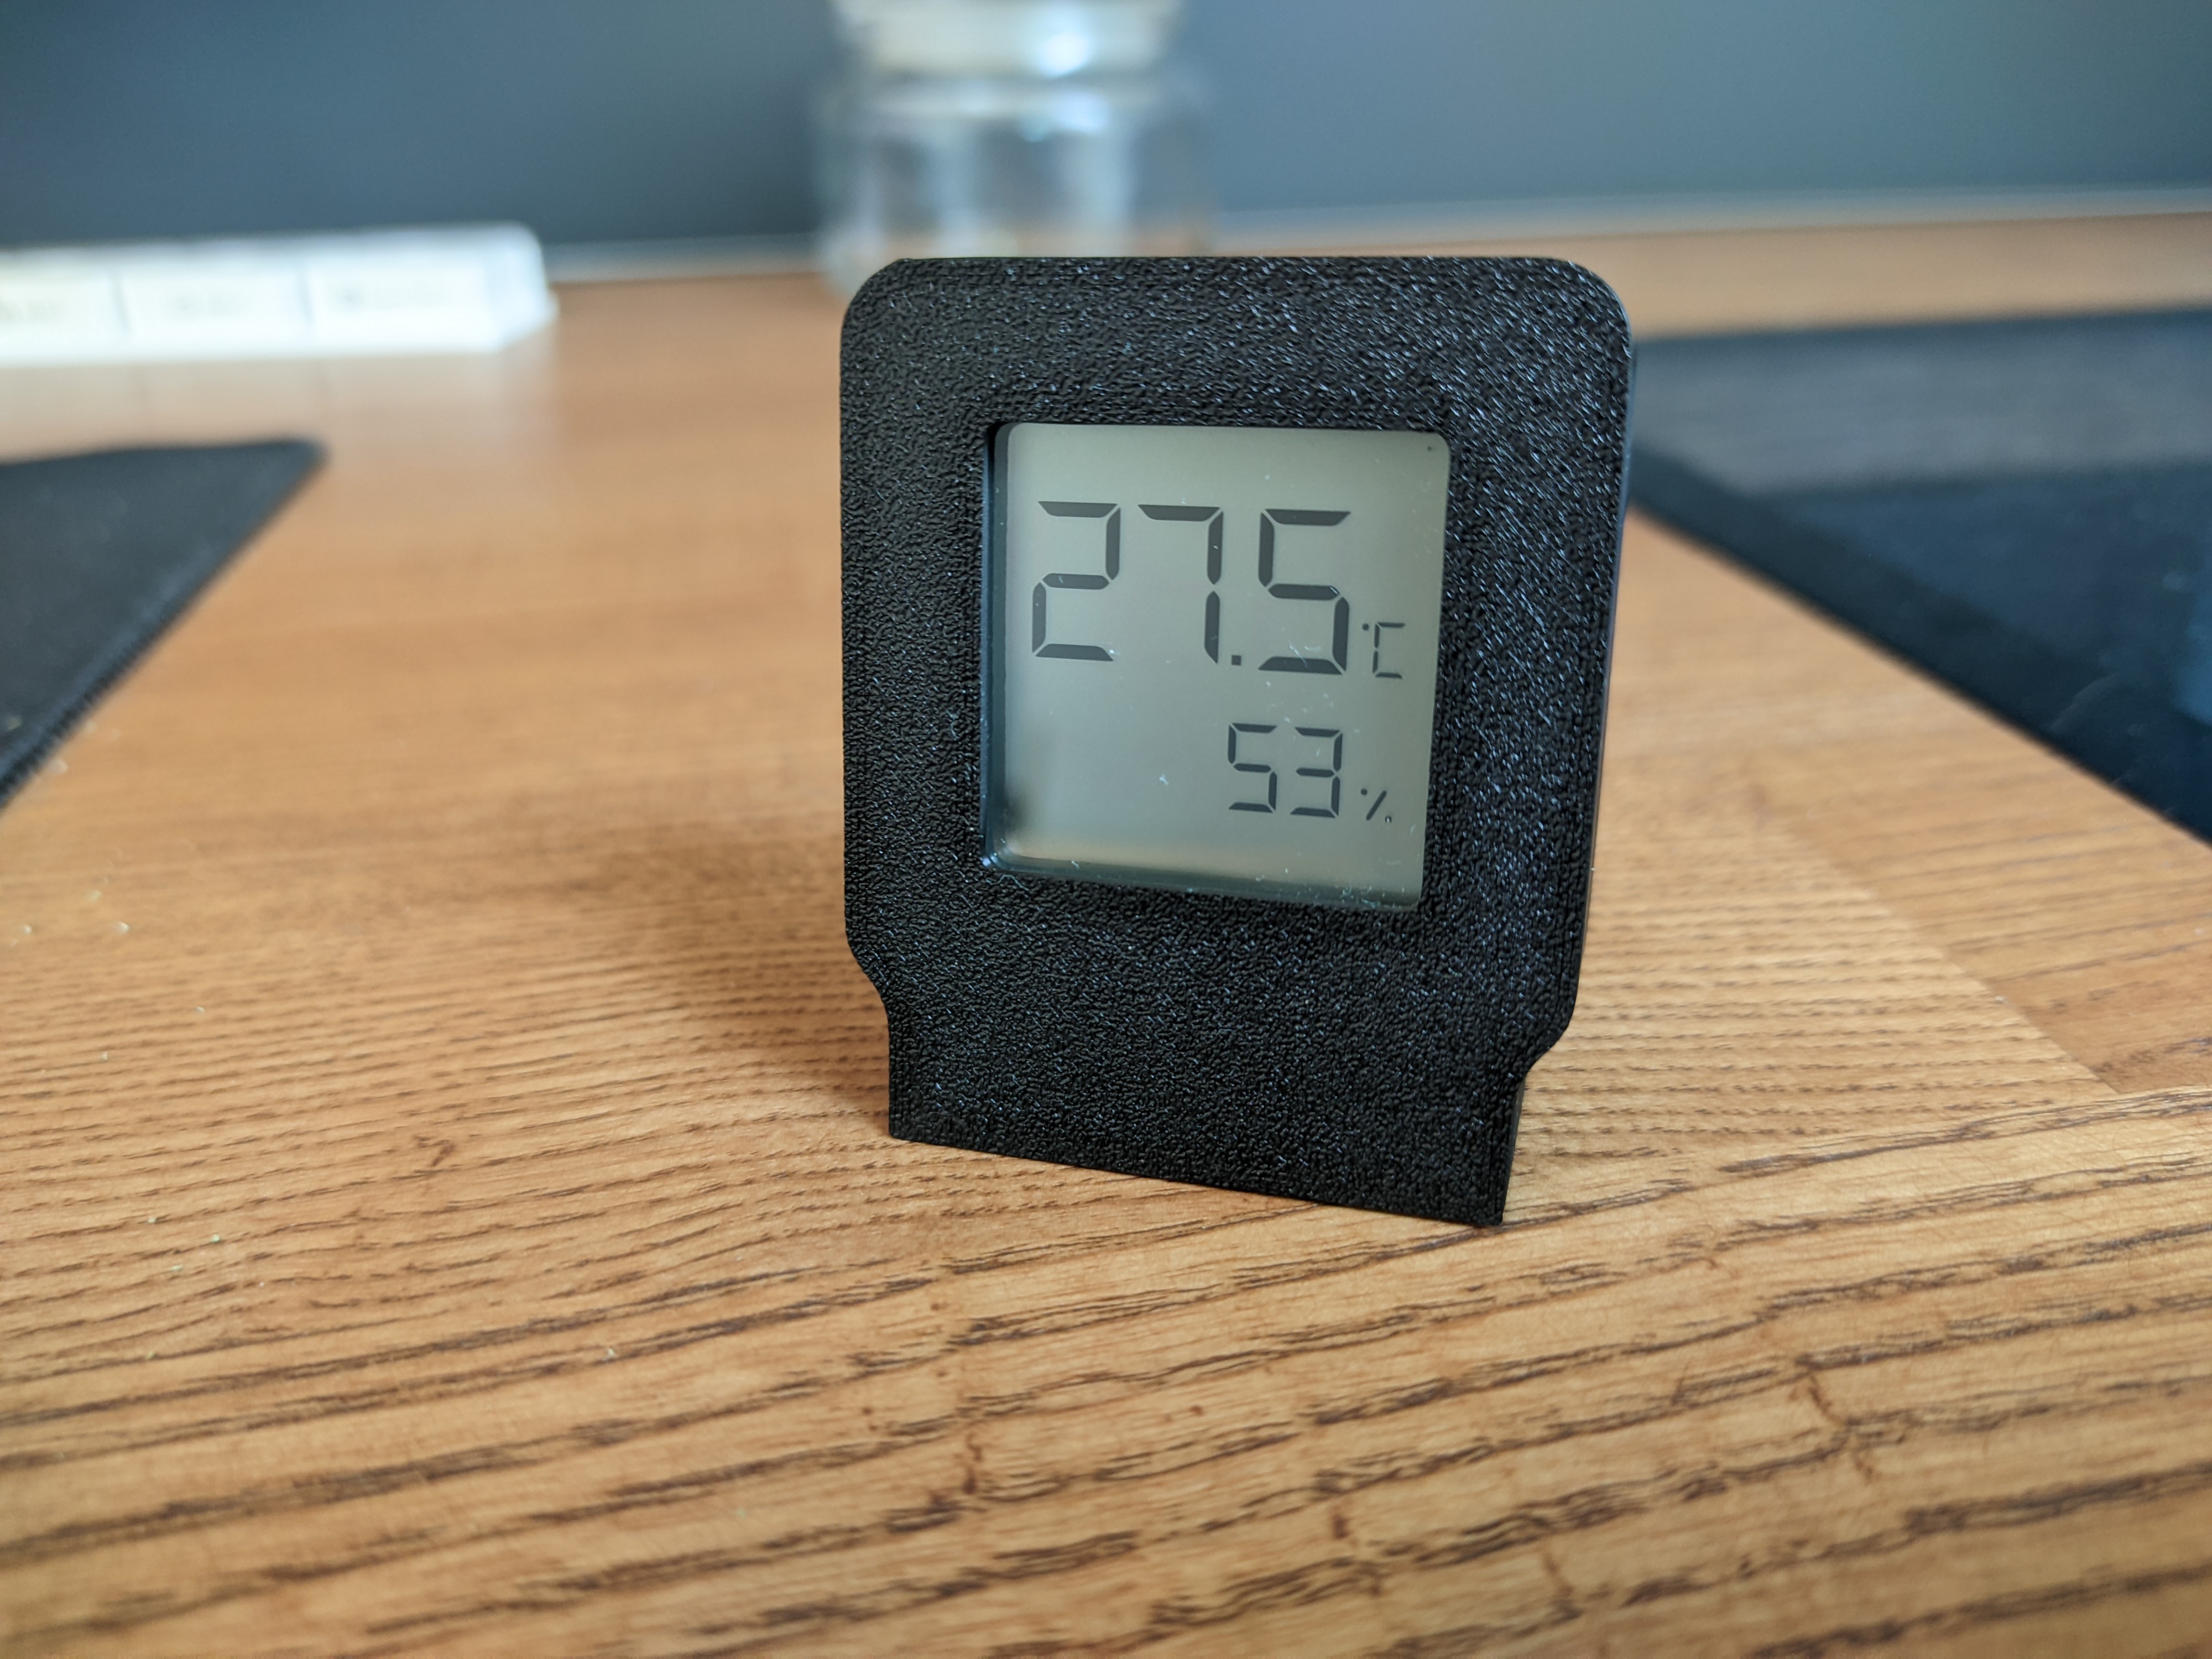 Xiaomi Mi Temperature and Humidity Monitor Stand by Szaman